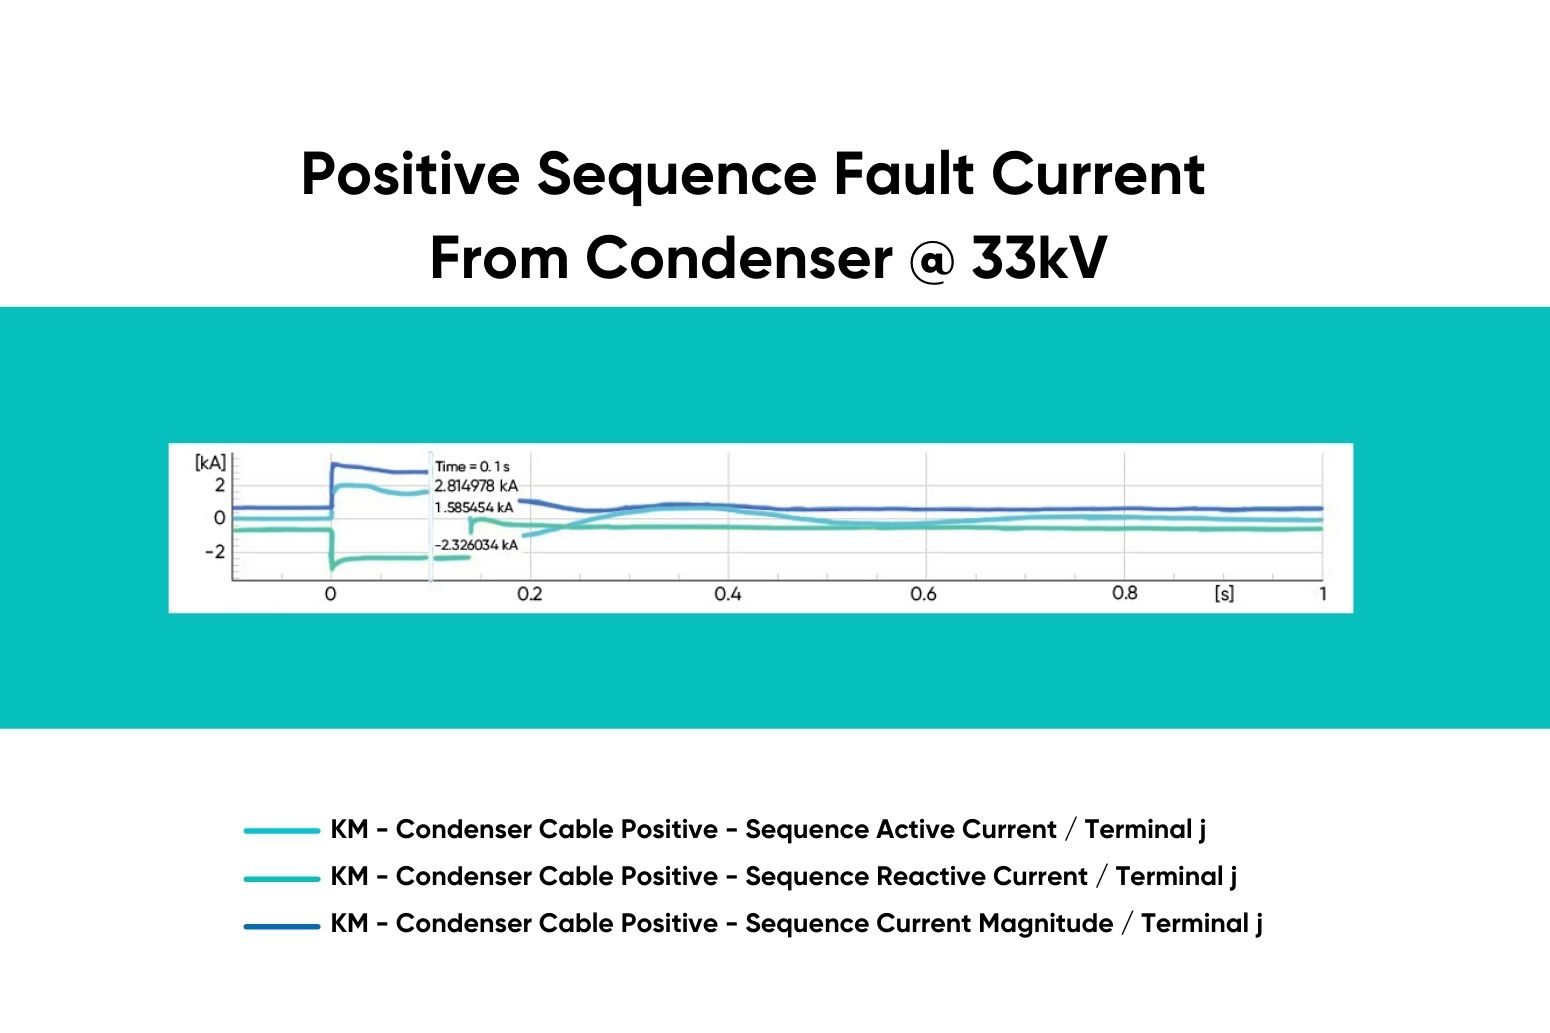 Positive Sequence Fault Current from Condenser 33kV